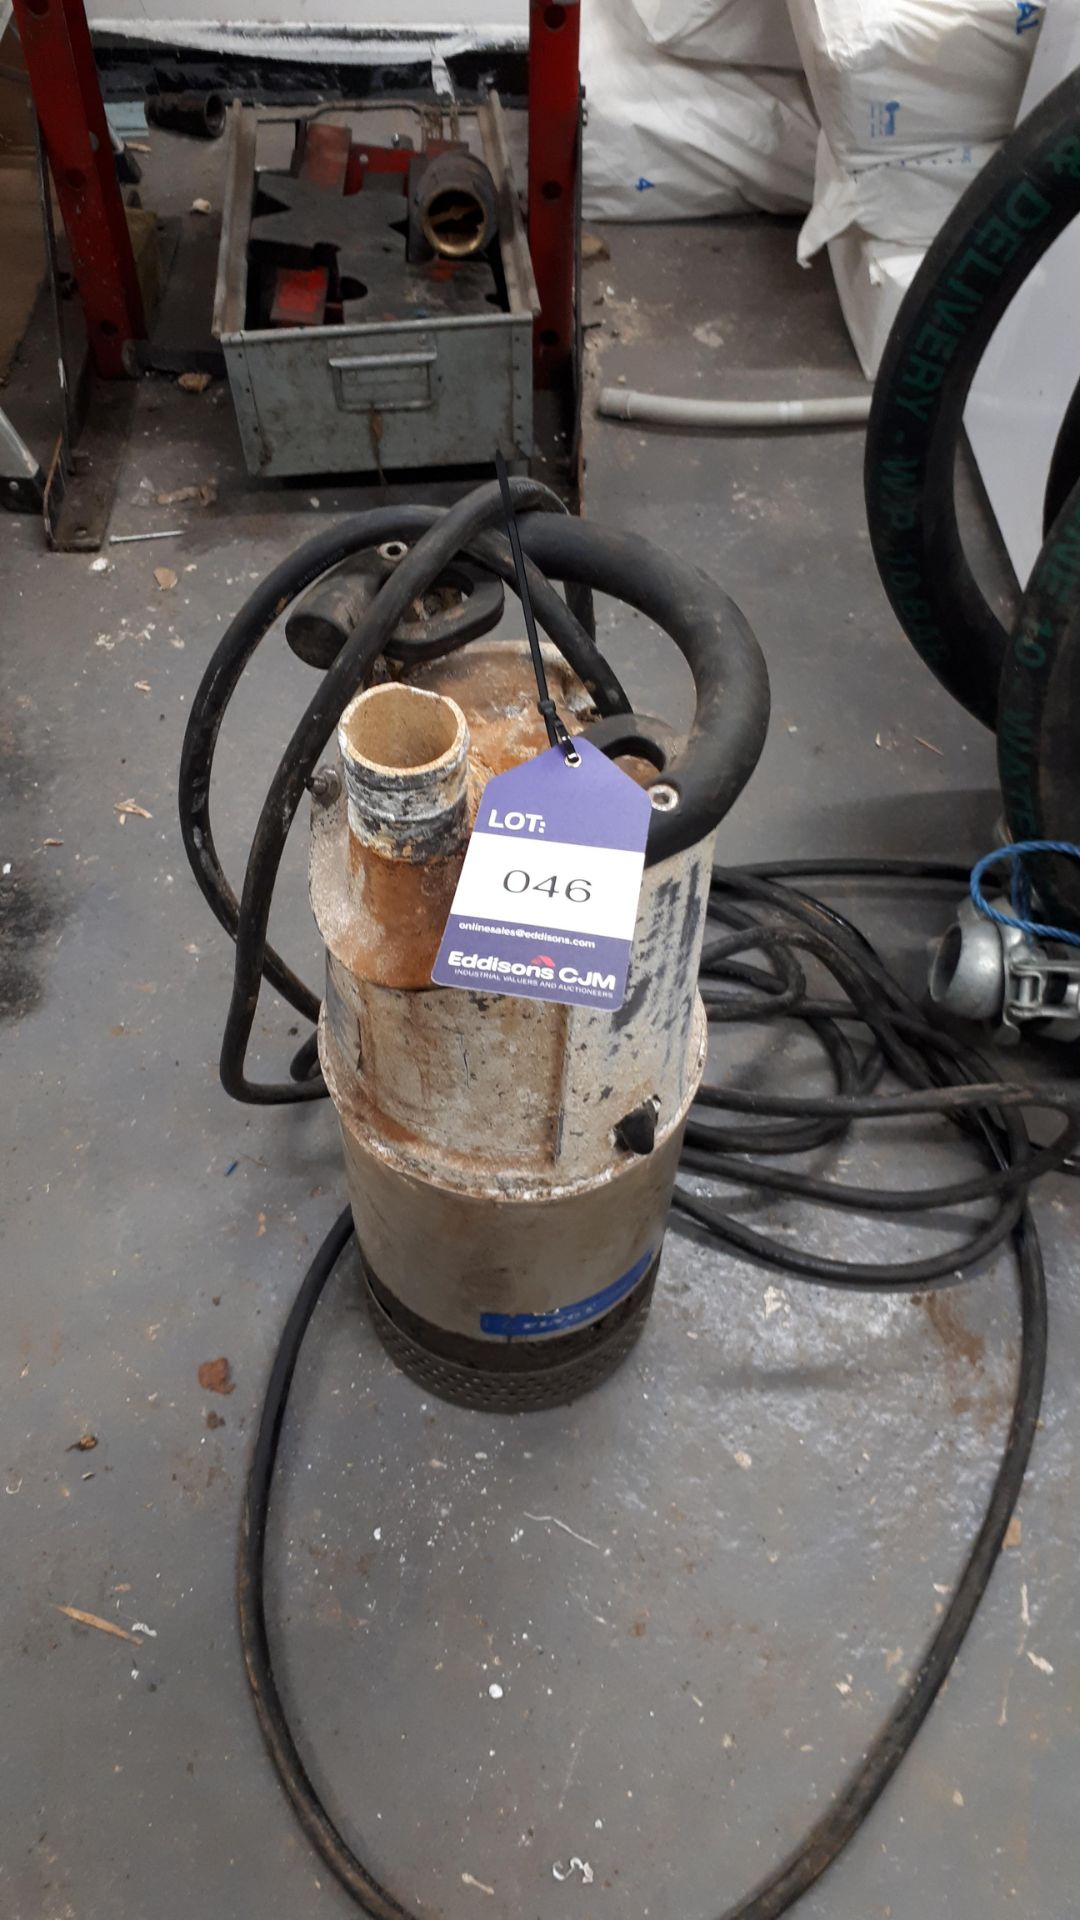 FLVGT submersible pump (Spares or repairs)